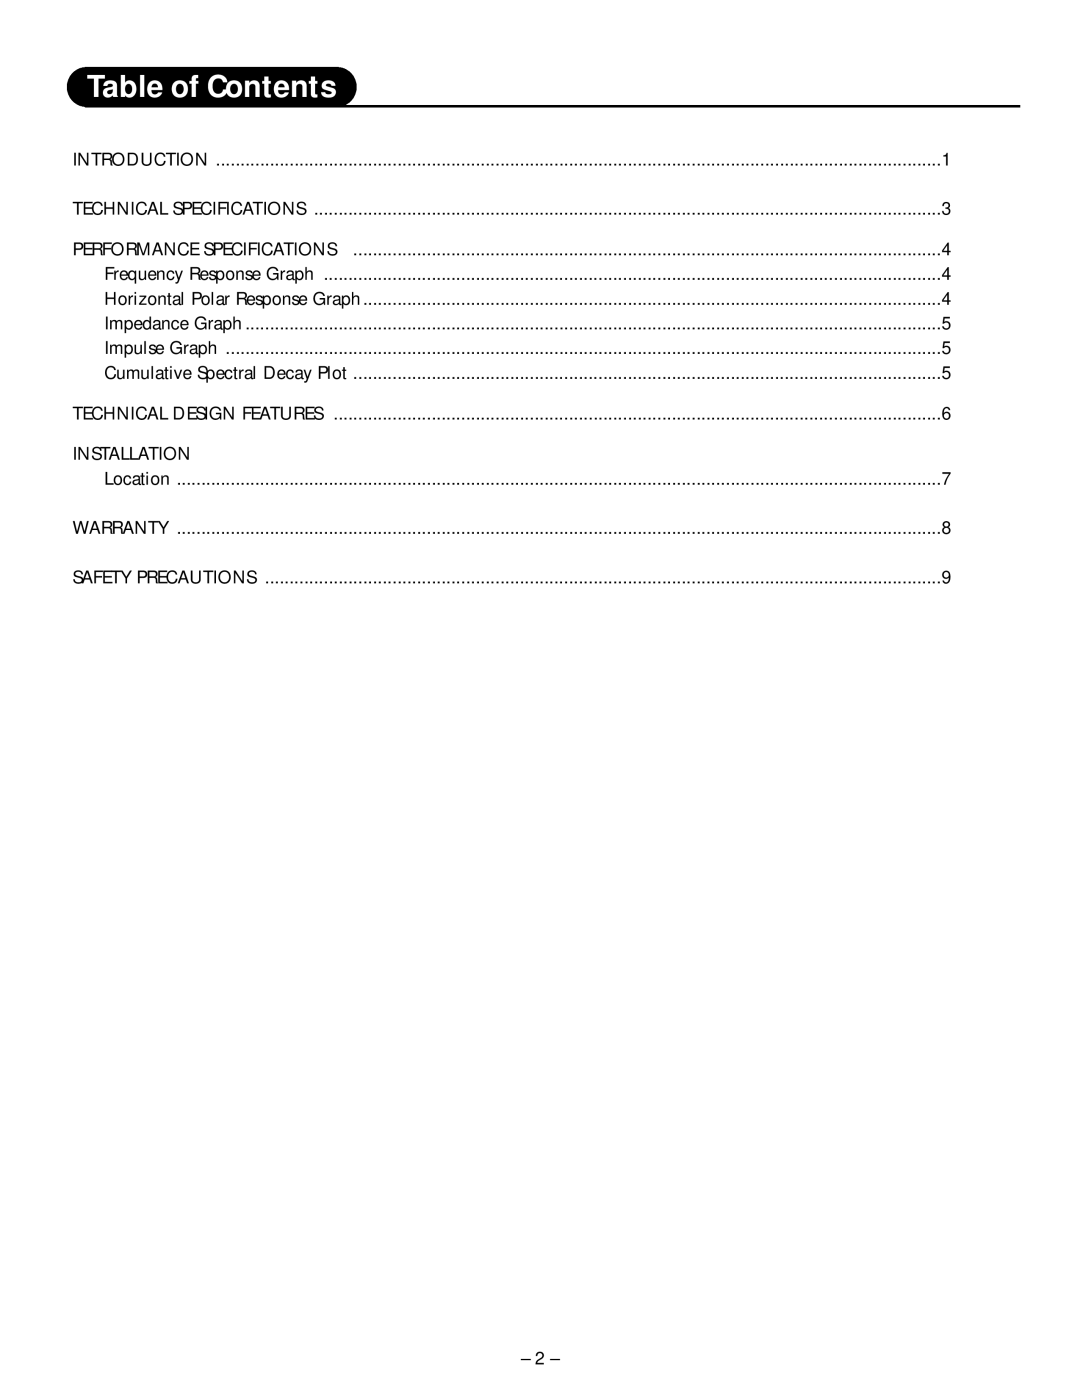 Hafler M5 manual Table of Contents 